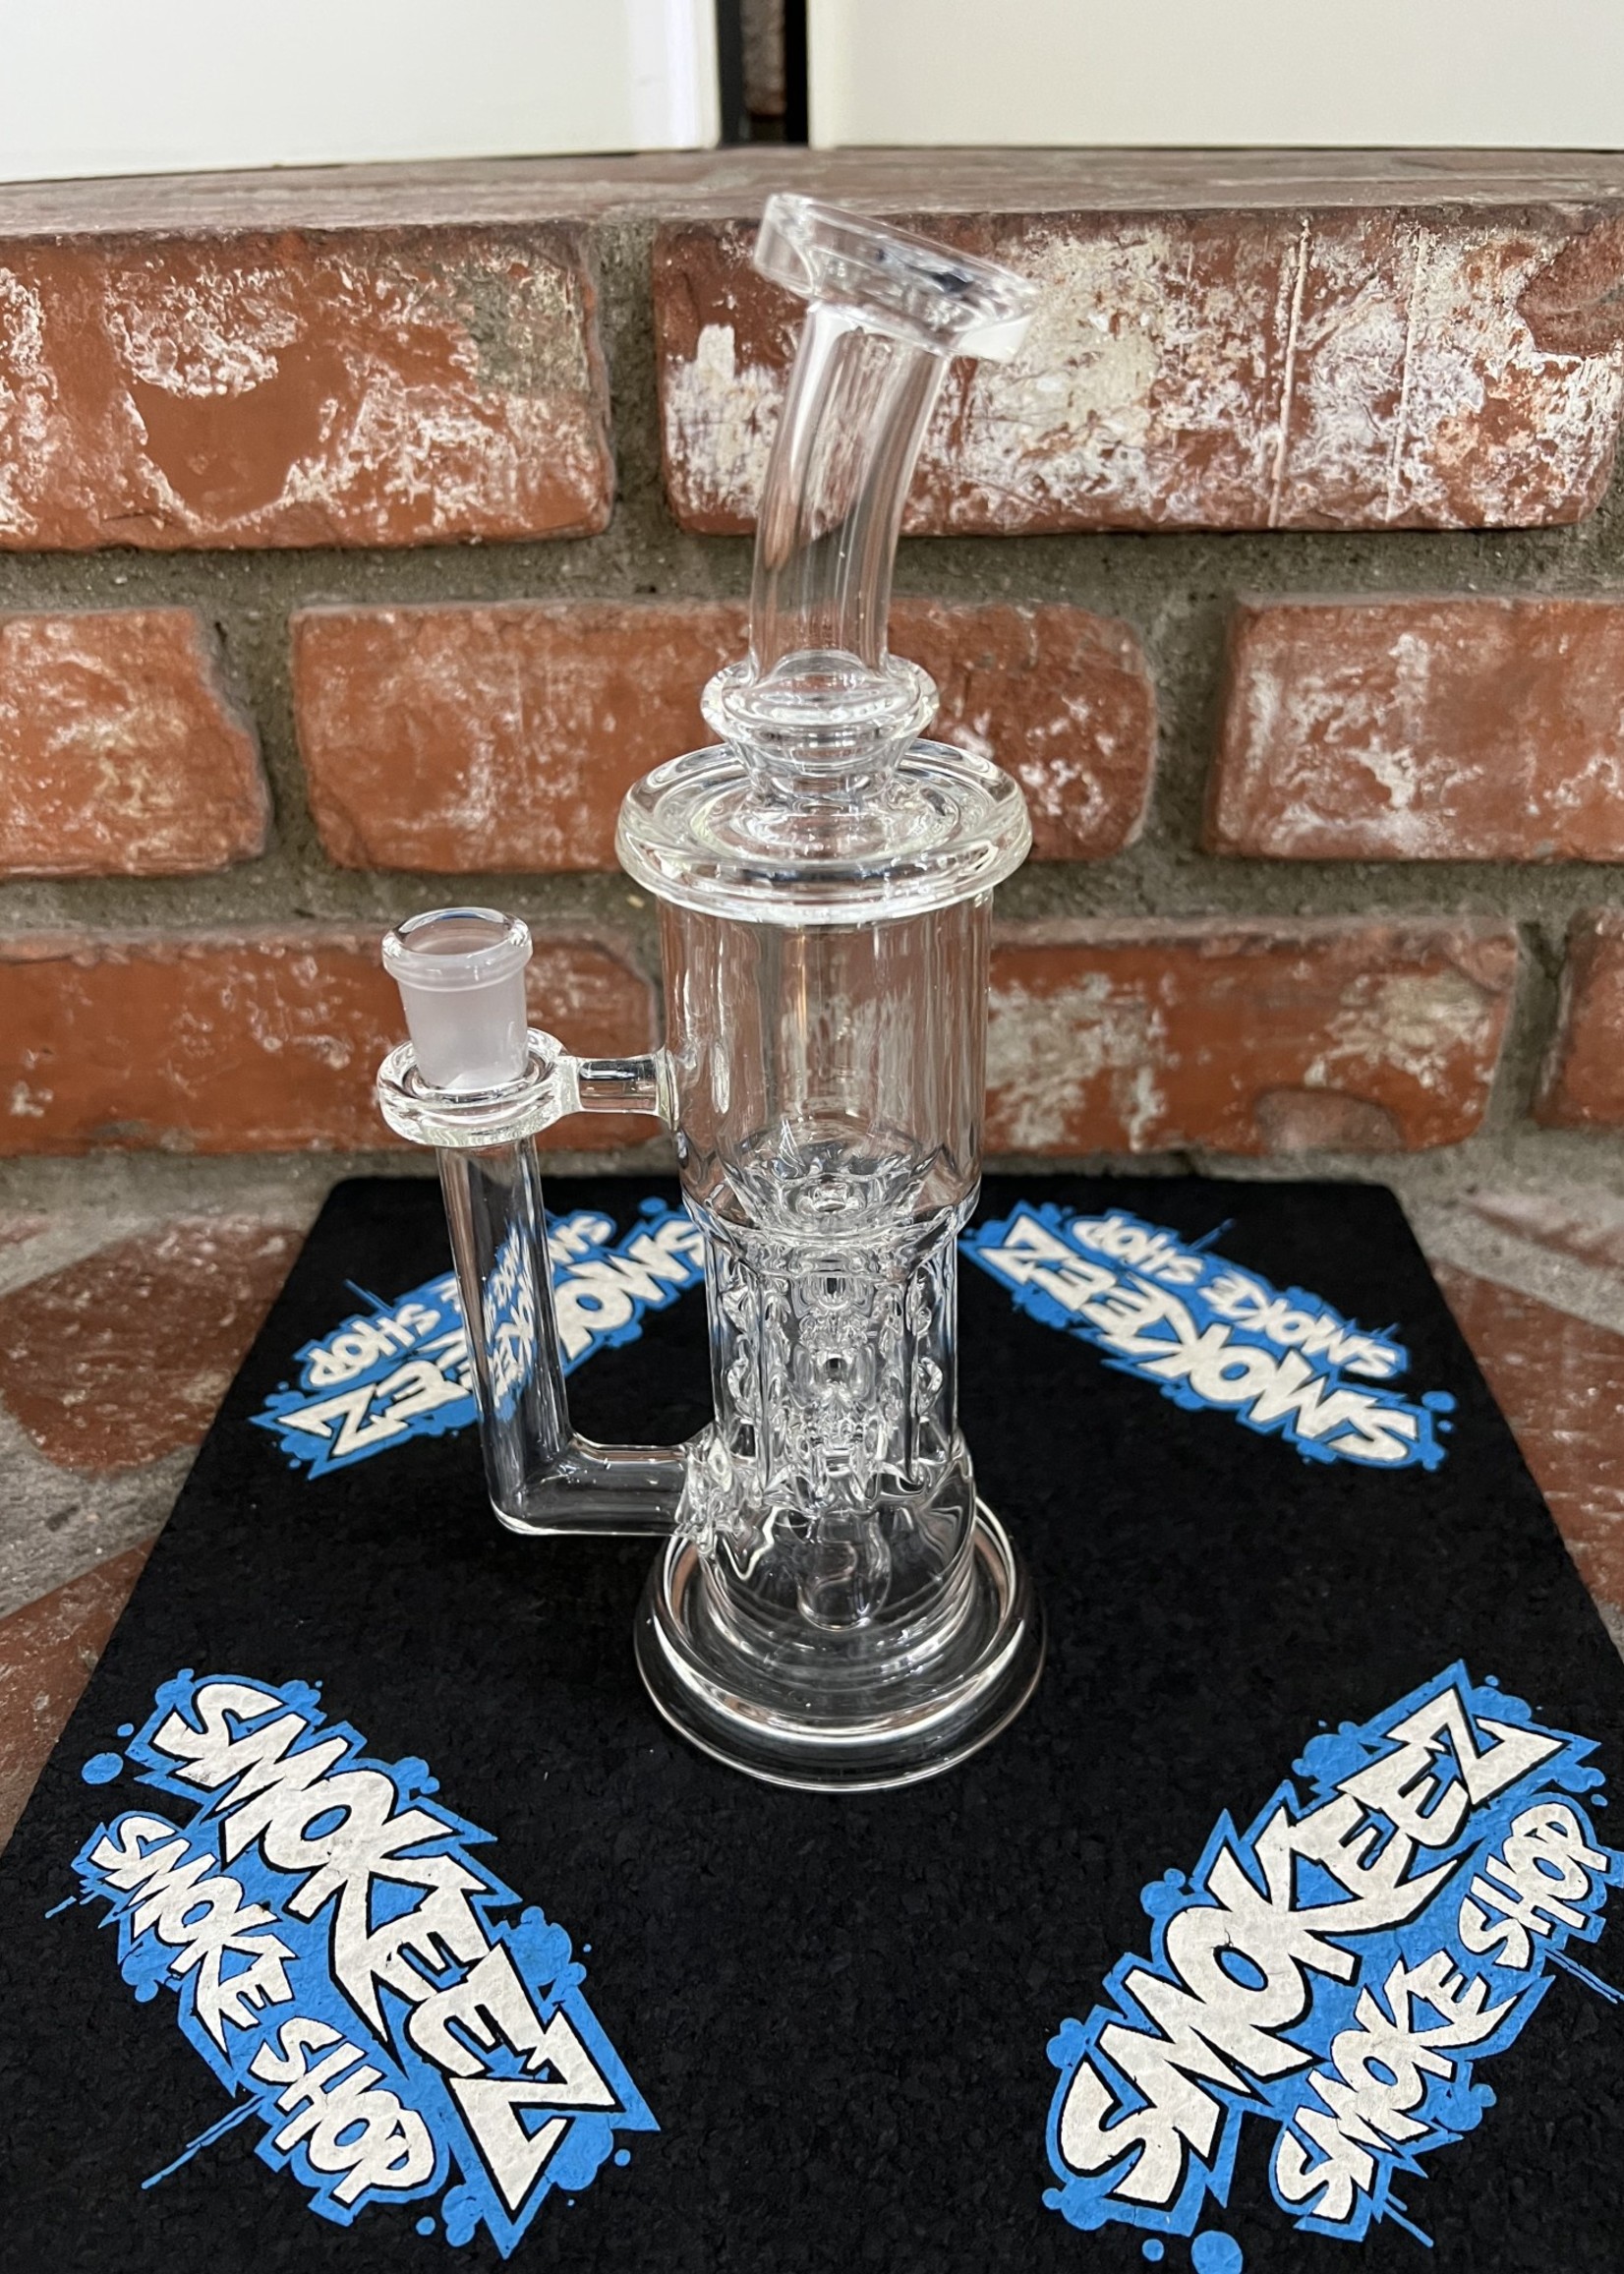 LEISURE GLASS LEISURE BABY JESUS INCYCLER 14mm